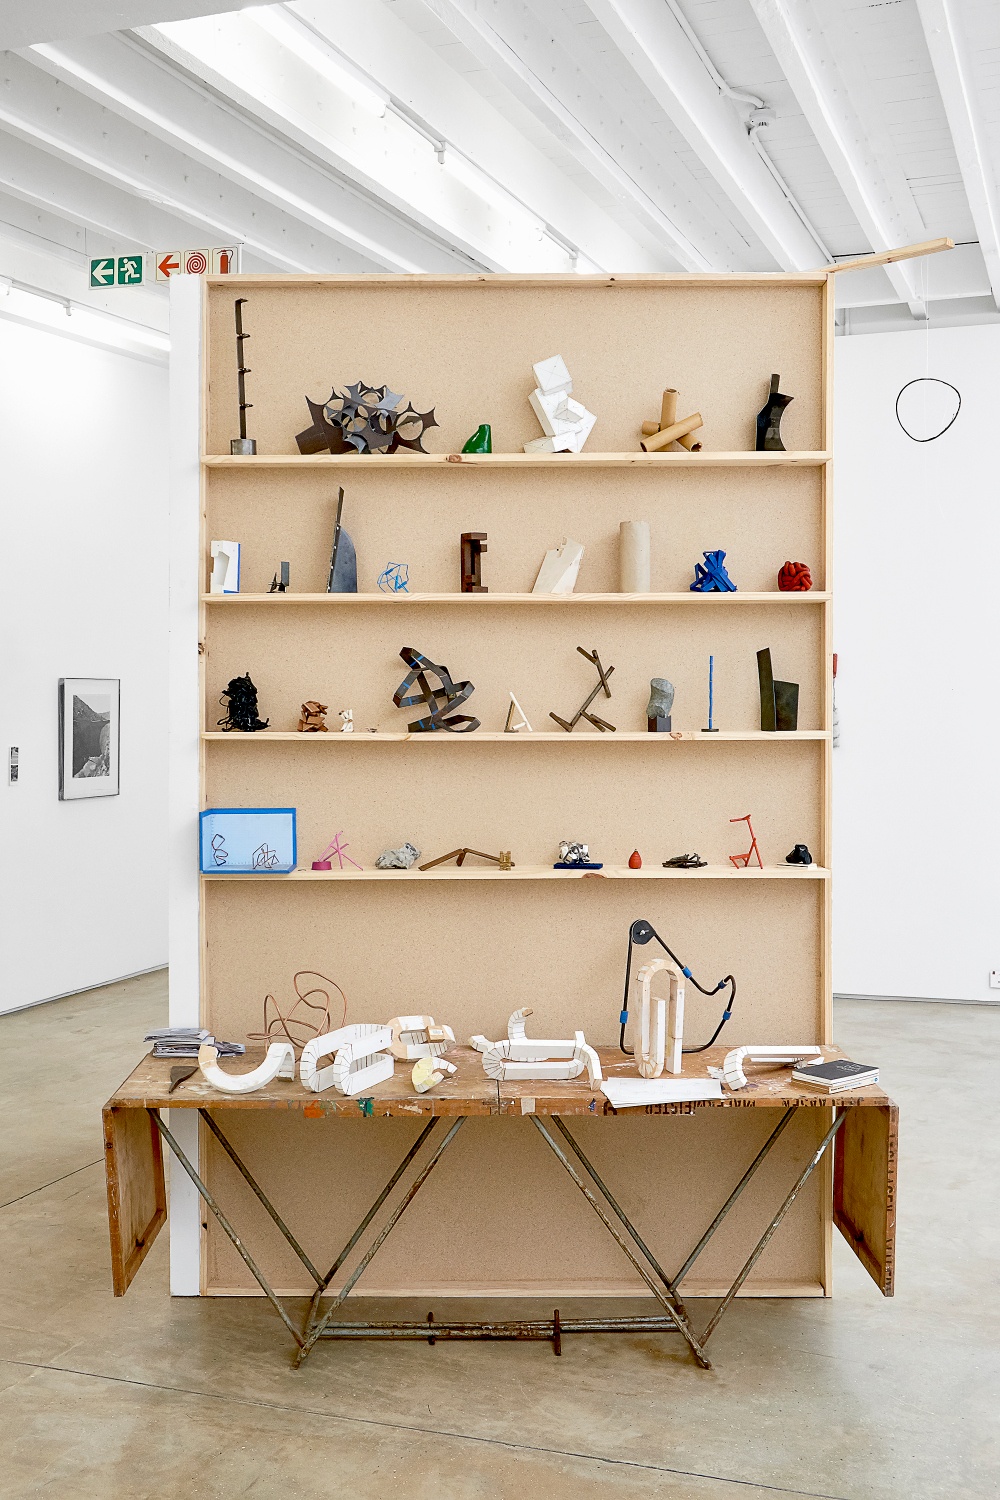 Installation photograph from the 2018 rendition of ‘Parallel Play’ in A4’s Gallery. At the back, Kyle Morland’s sculptural objects are arranged on a wooden shelving unit. At the front, Morland’s sculptural objects sit on a wooden table.
